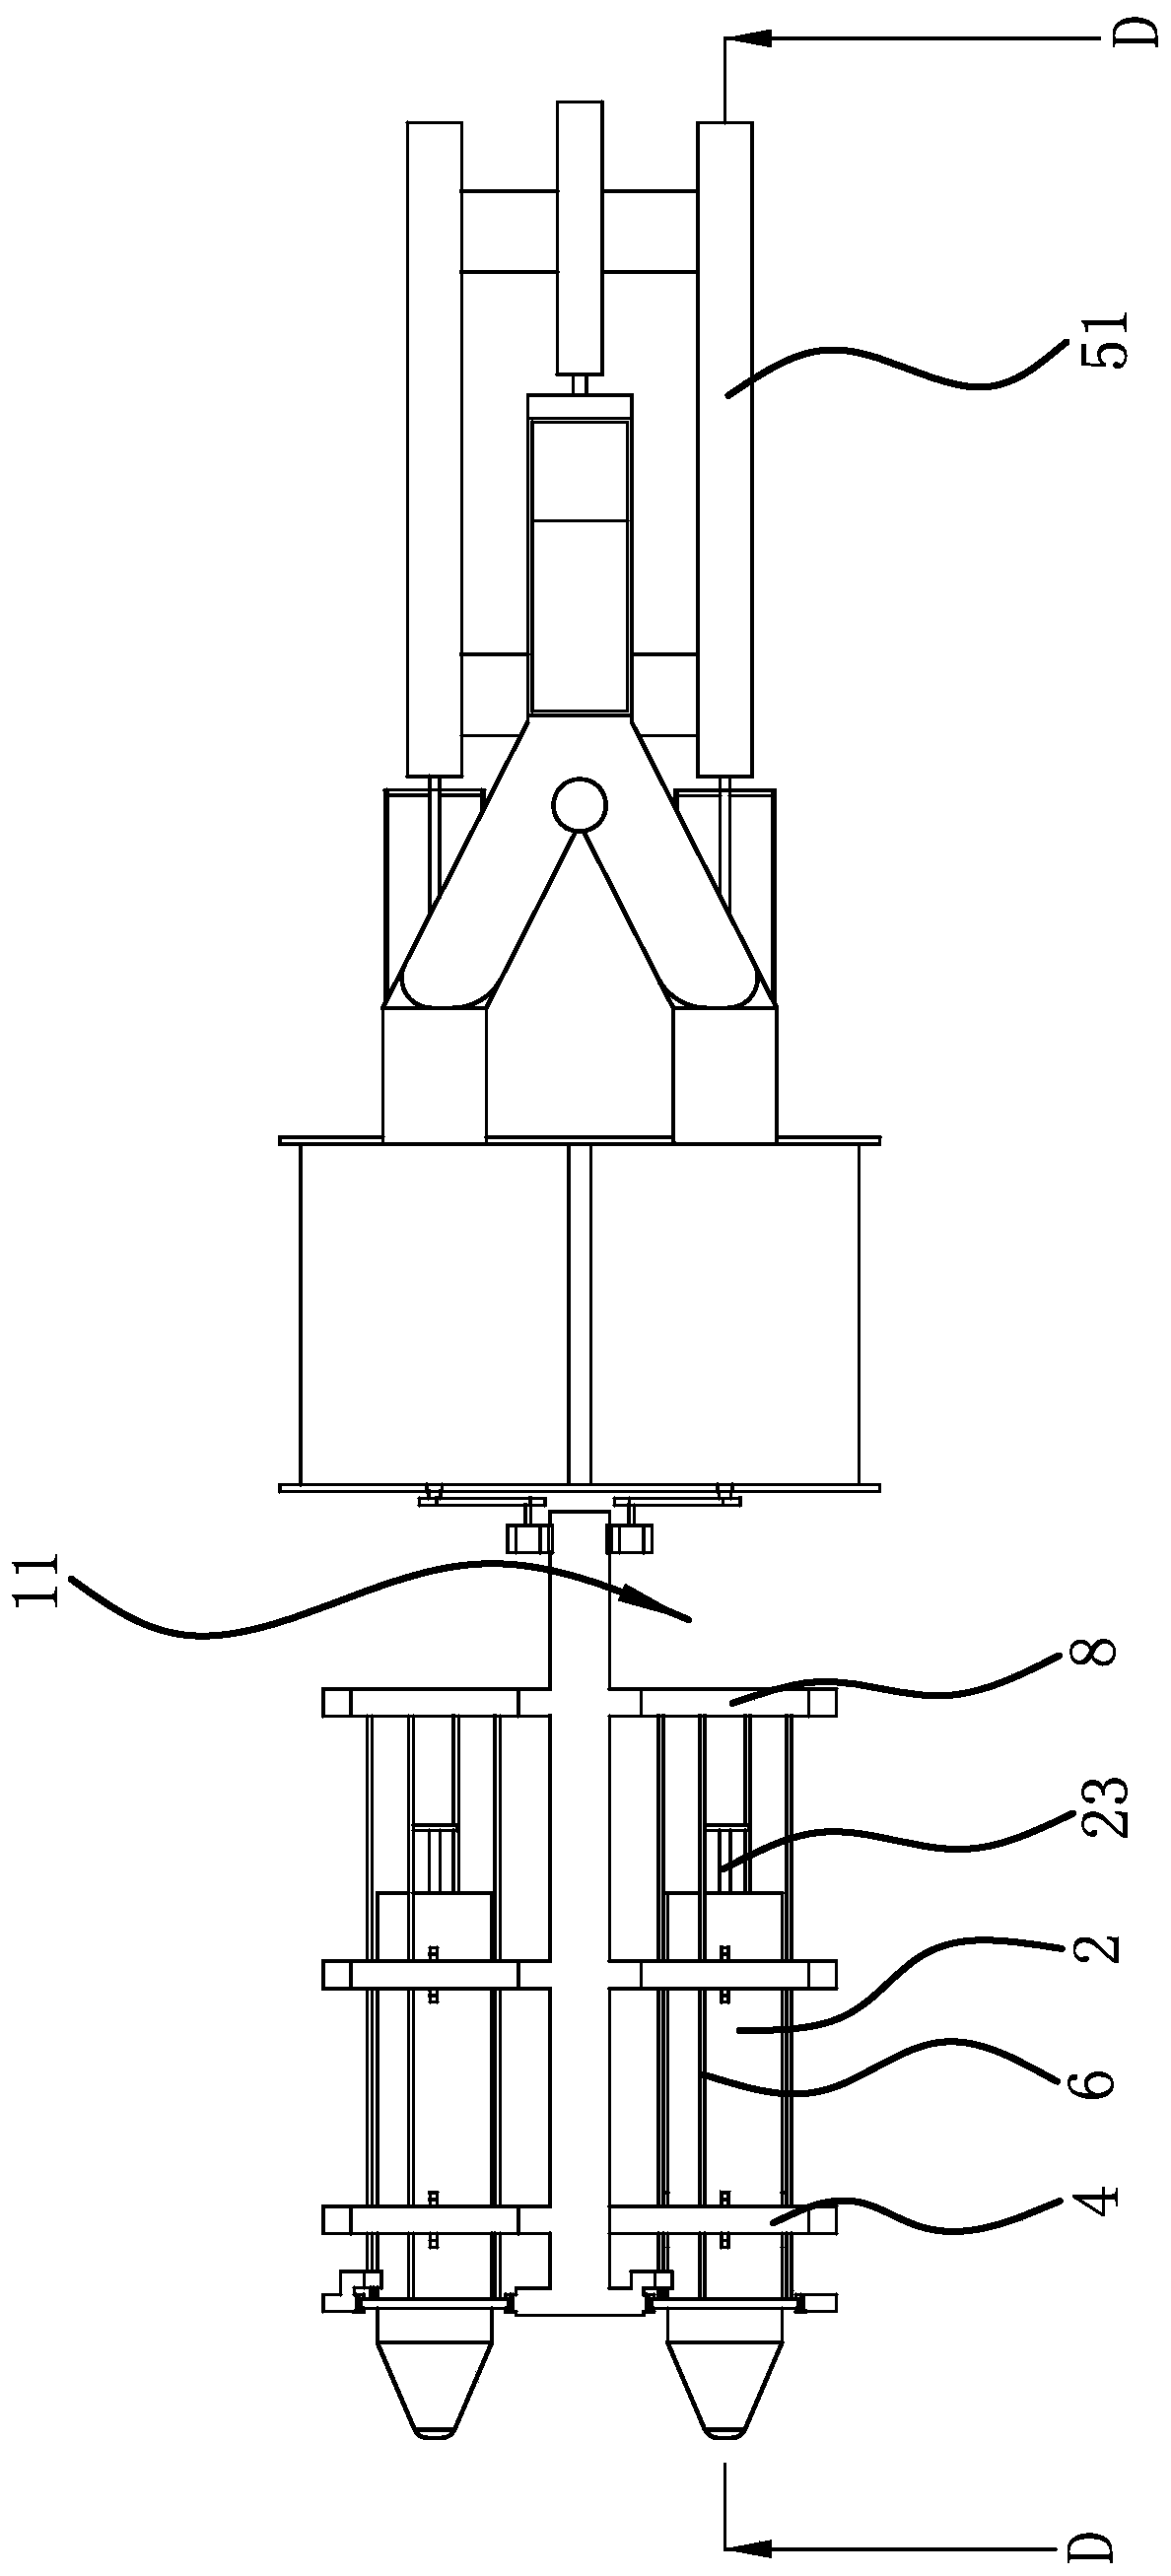 A bagging mechanism for packaging equipment